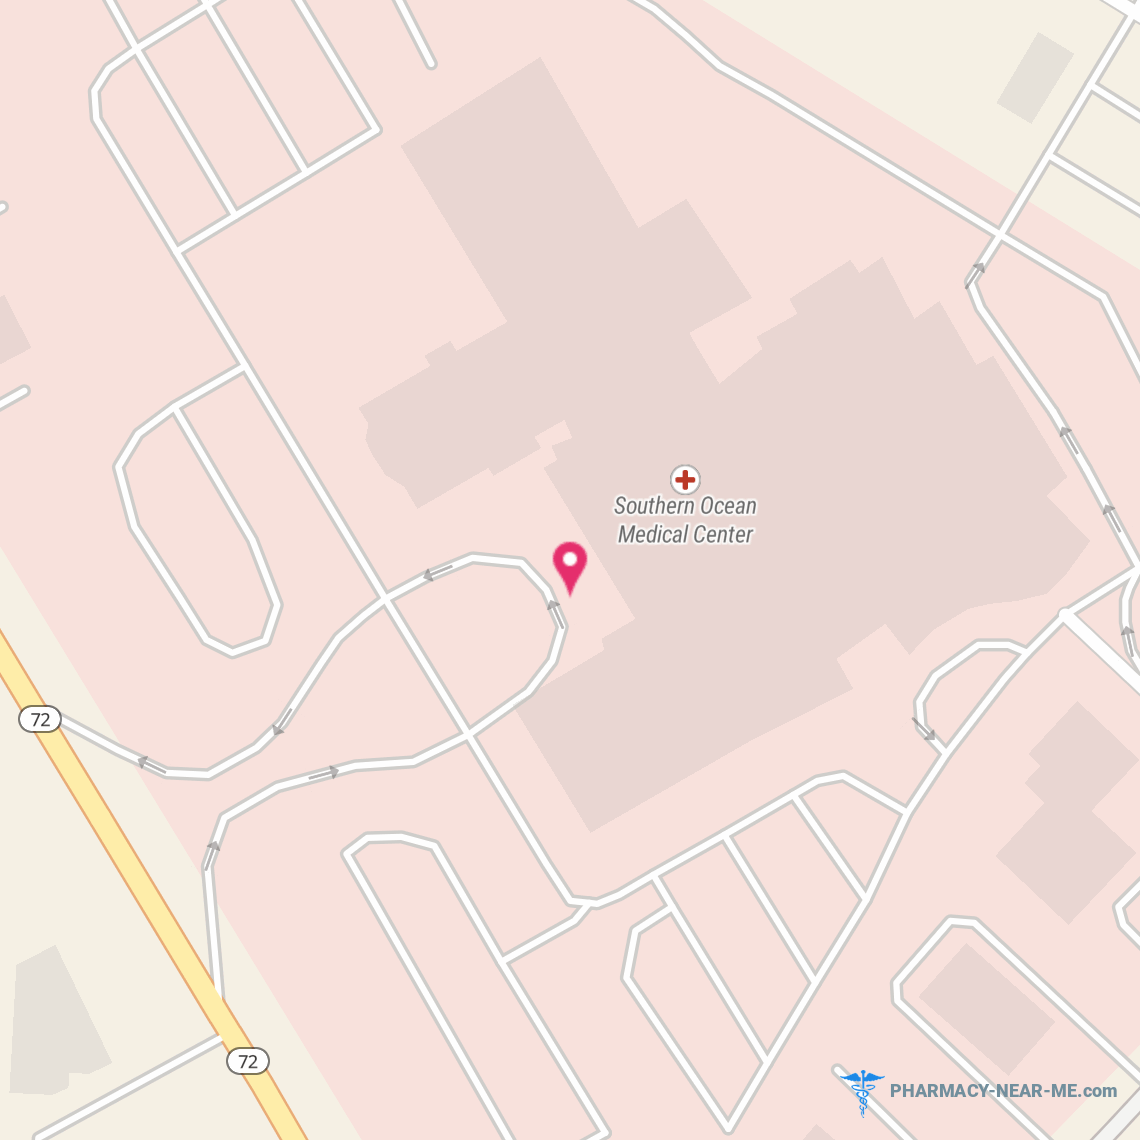 HMH HOSPITALS CORPORATION - Pharmacy Hours, Phone, Reviews & Information: 1140 New Jersey Highway 72, Manahawkin, New Jersey 08050, United States